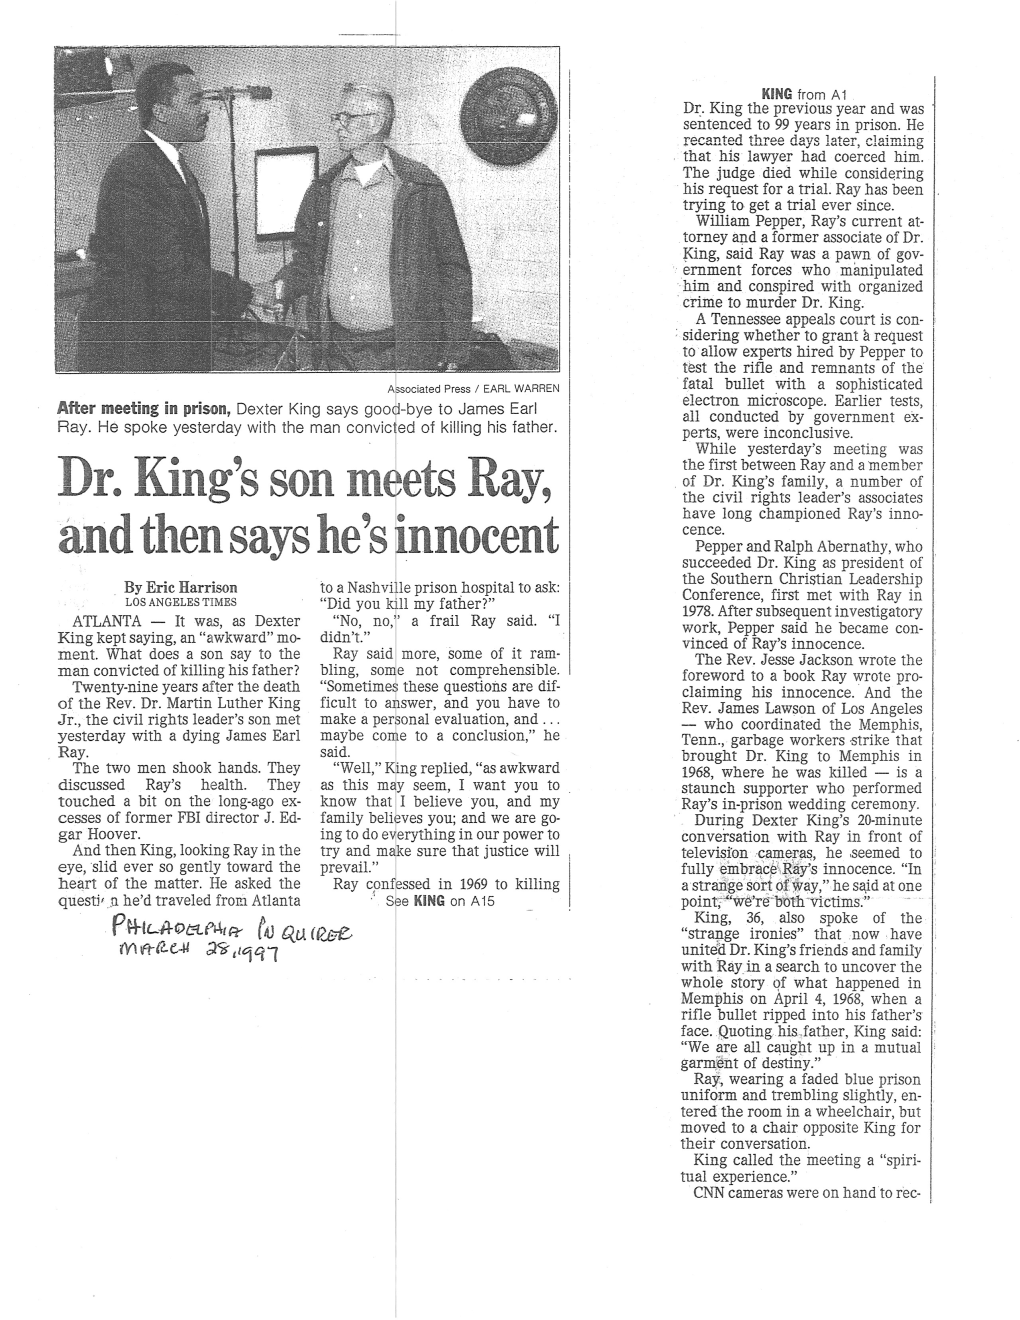 Dr. King's Son M Ets Ray, and Then Says He's Nnocent